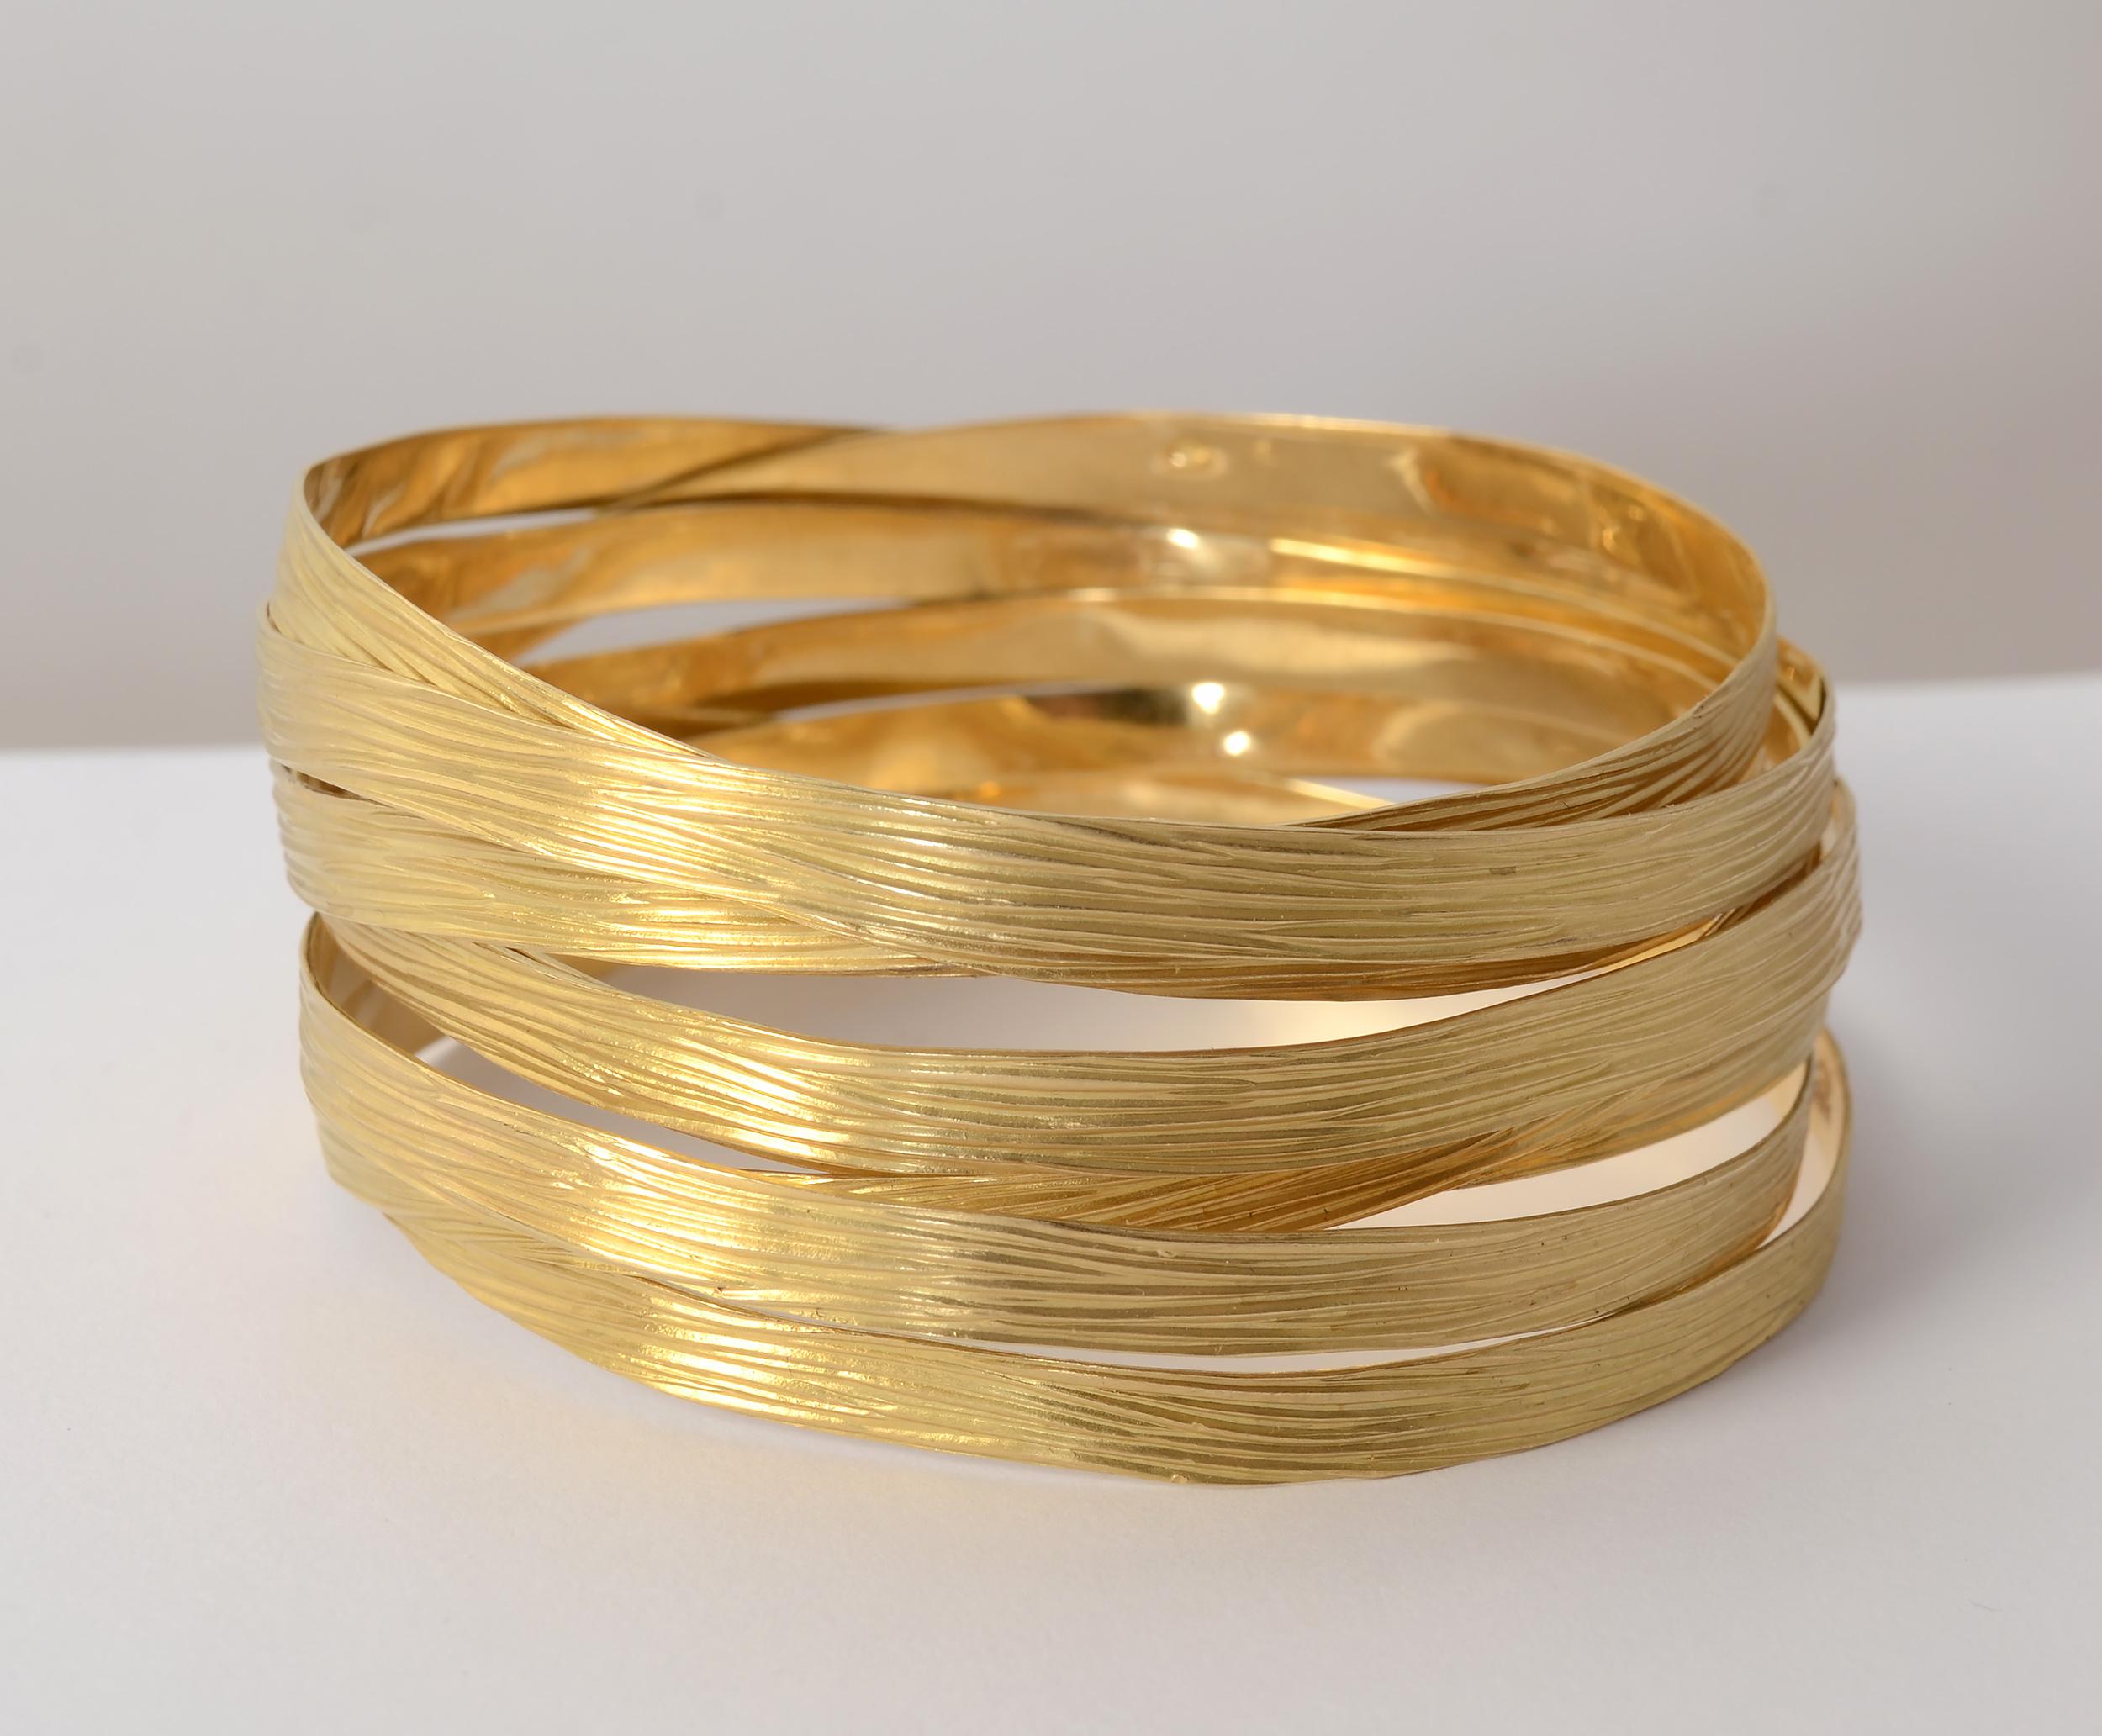 Eight interlooped bangle bracelets make a stunning sculptural statement. The flat gold bands are enhanced with a striated texture. Each bangle is 3/8